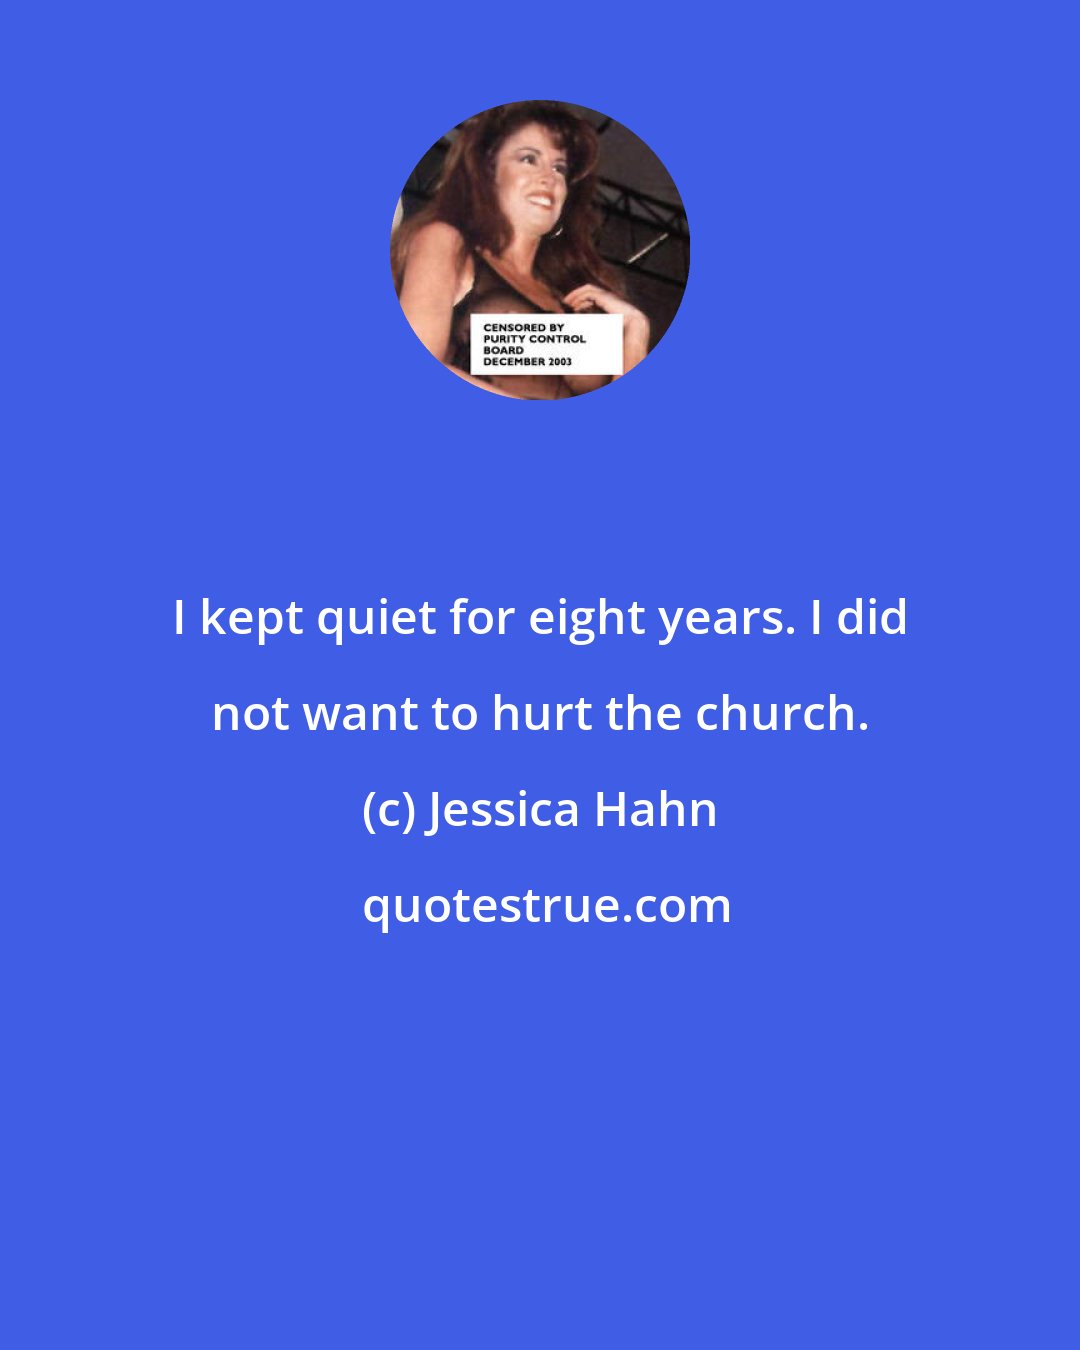 Jessica Hahn: I kept quiet for eight years. I did not want to hurt the church.